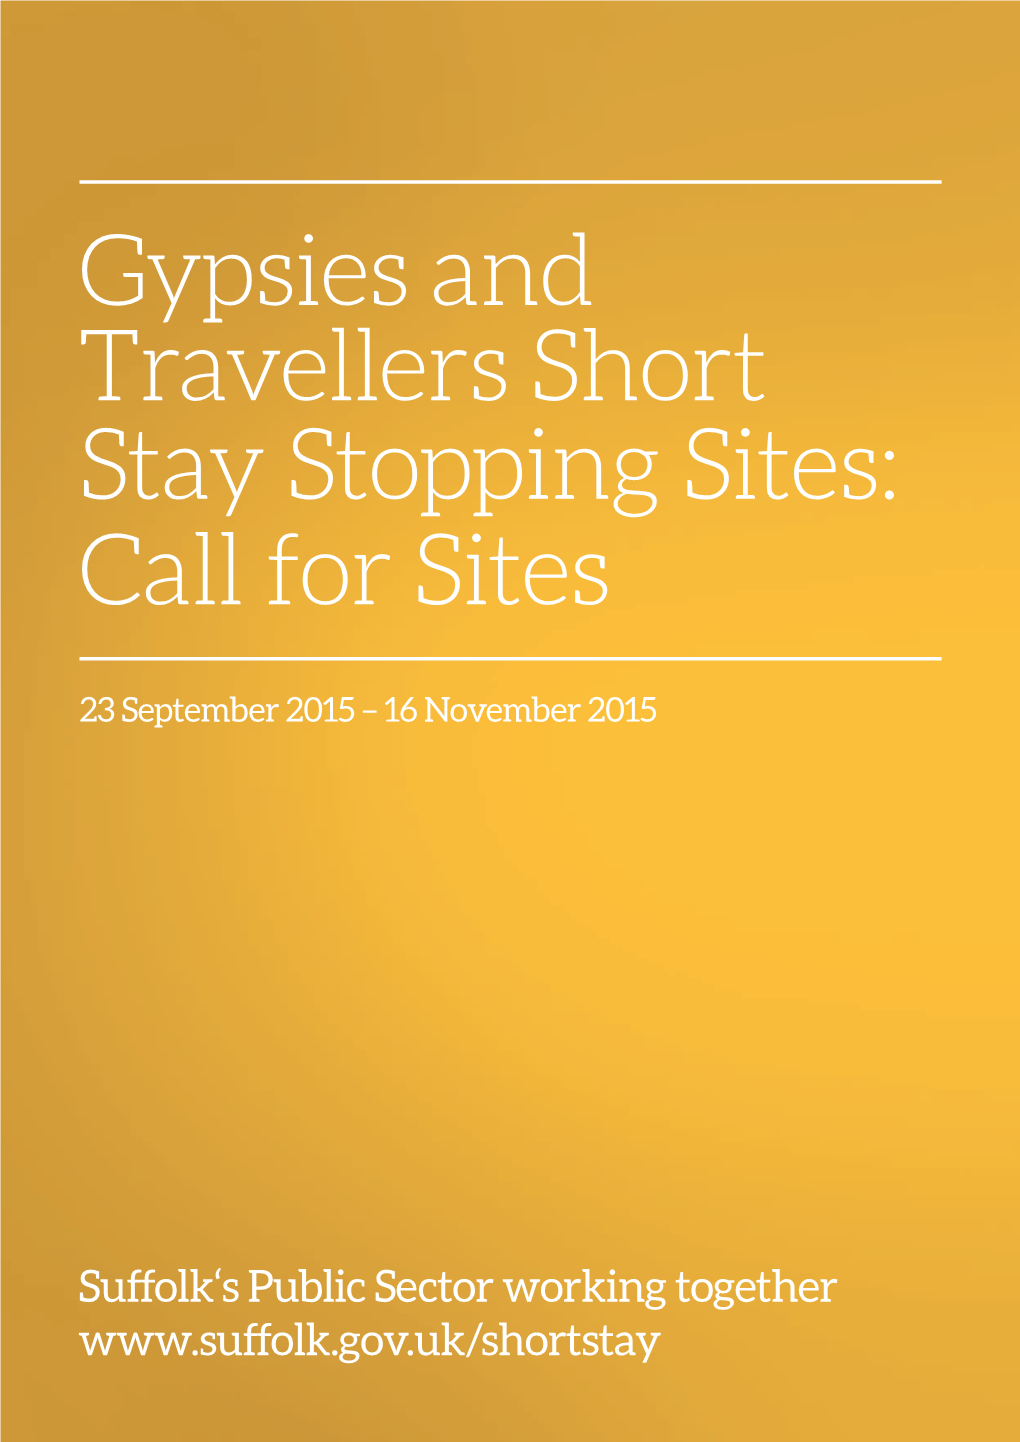 Gypsies and Travellers Short Stay Stopping Sites: Call for Sites